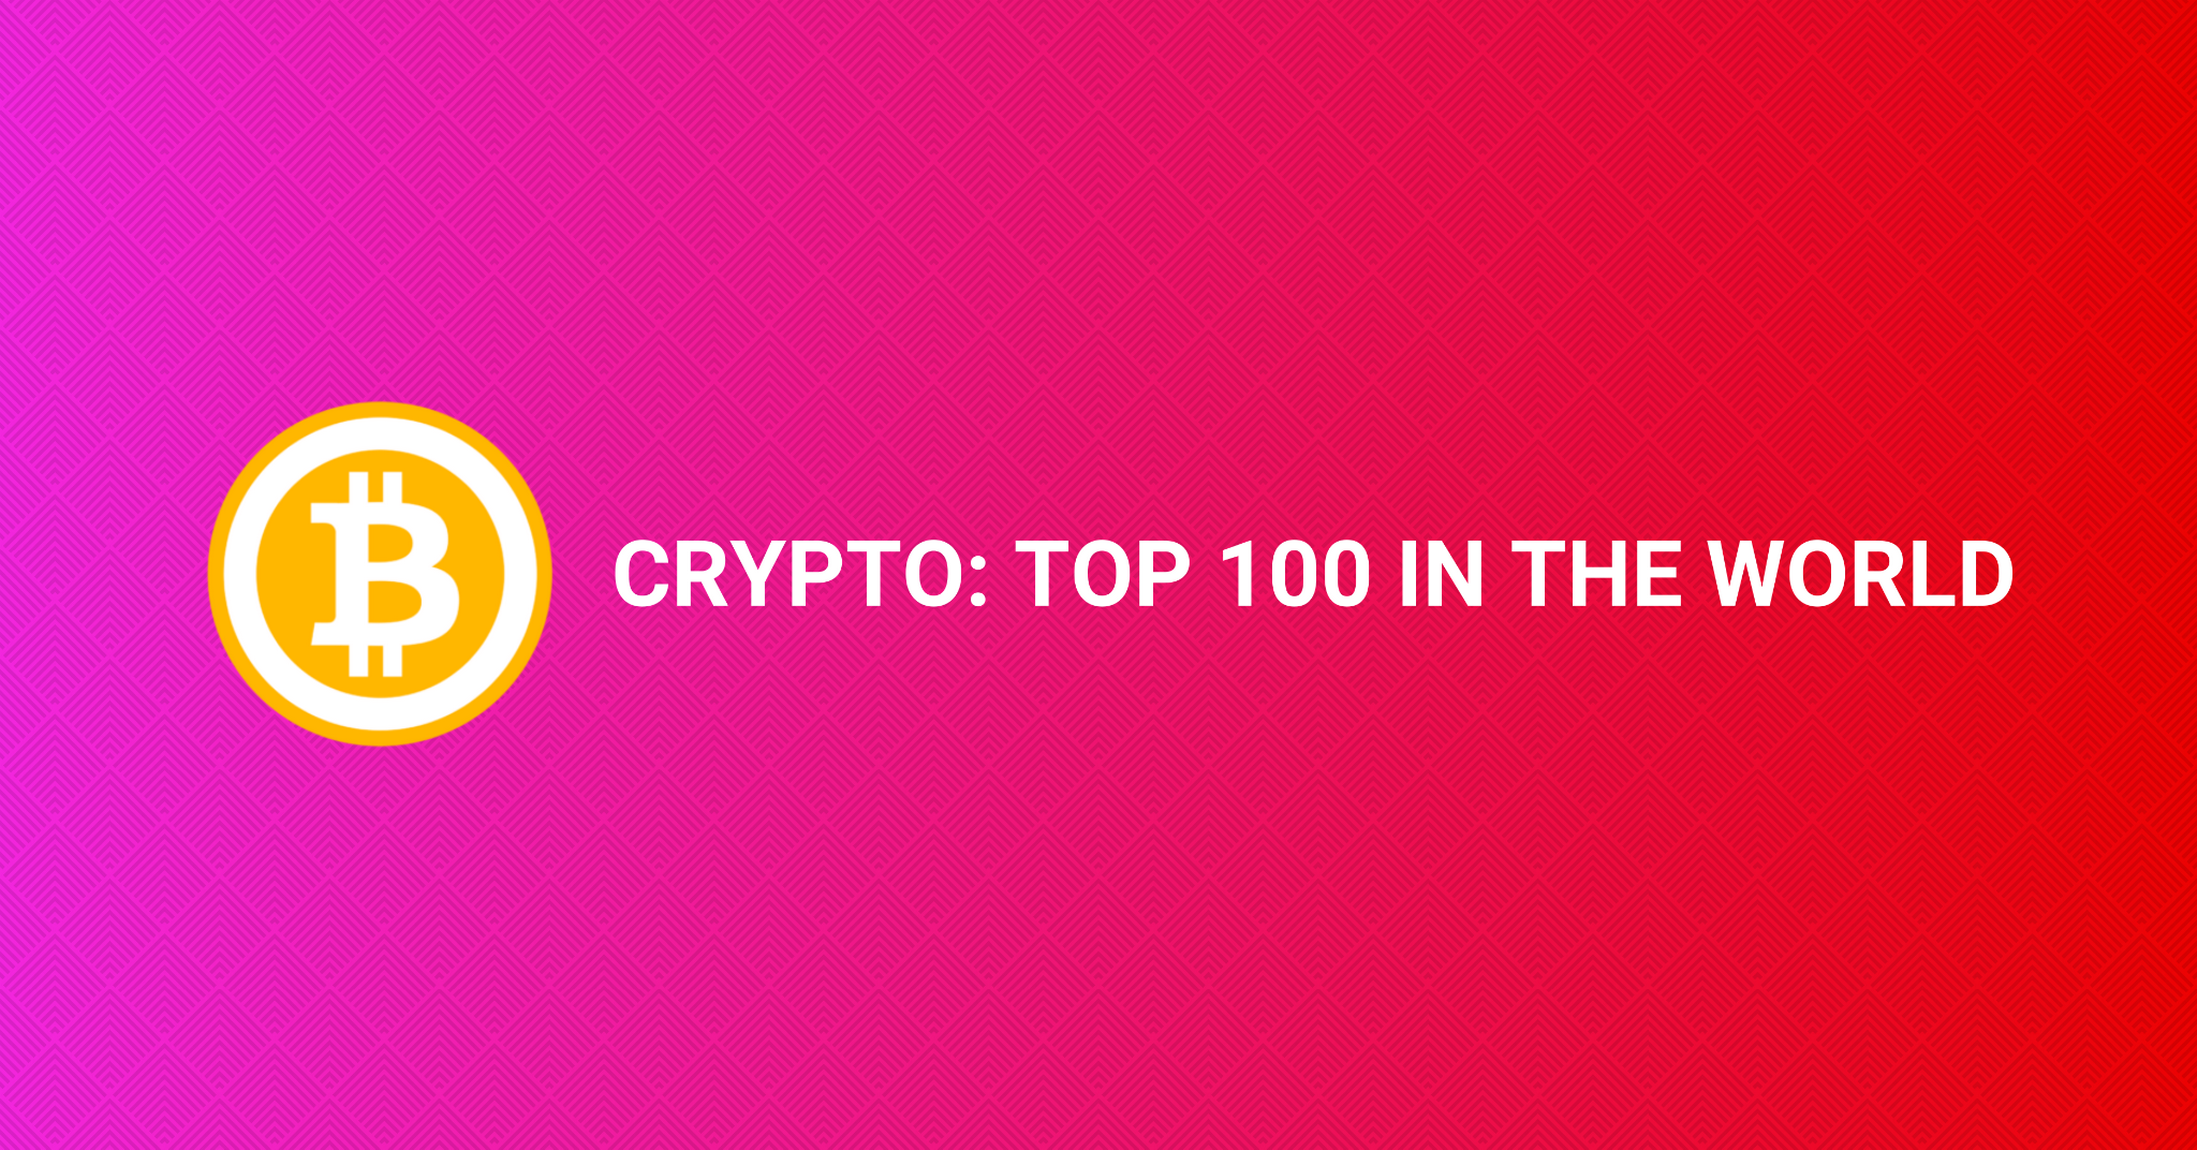 Crypto: Top 100 in the World